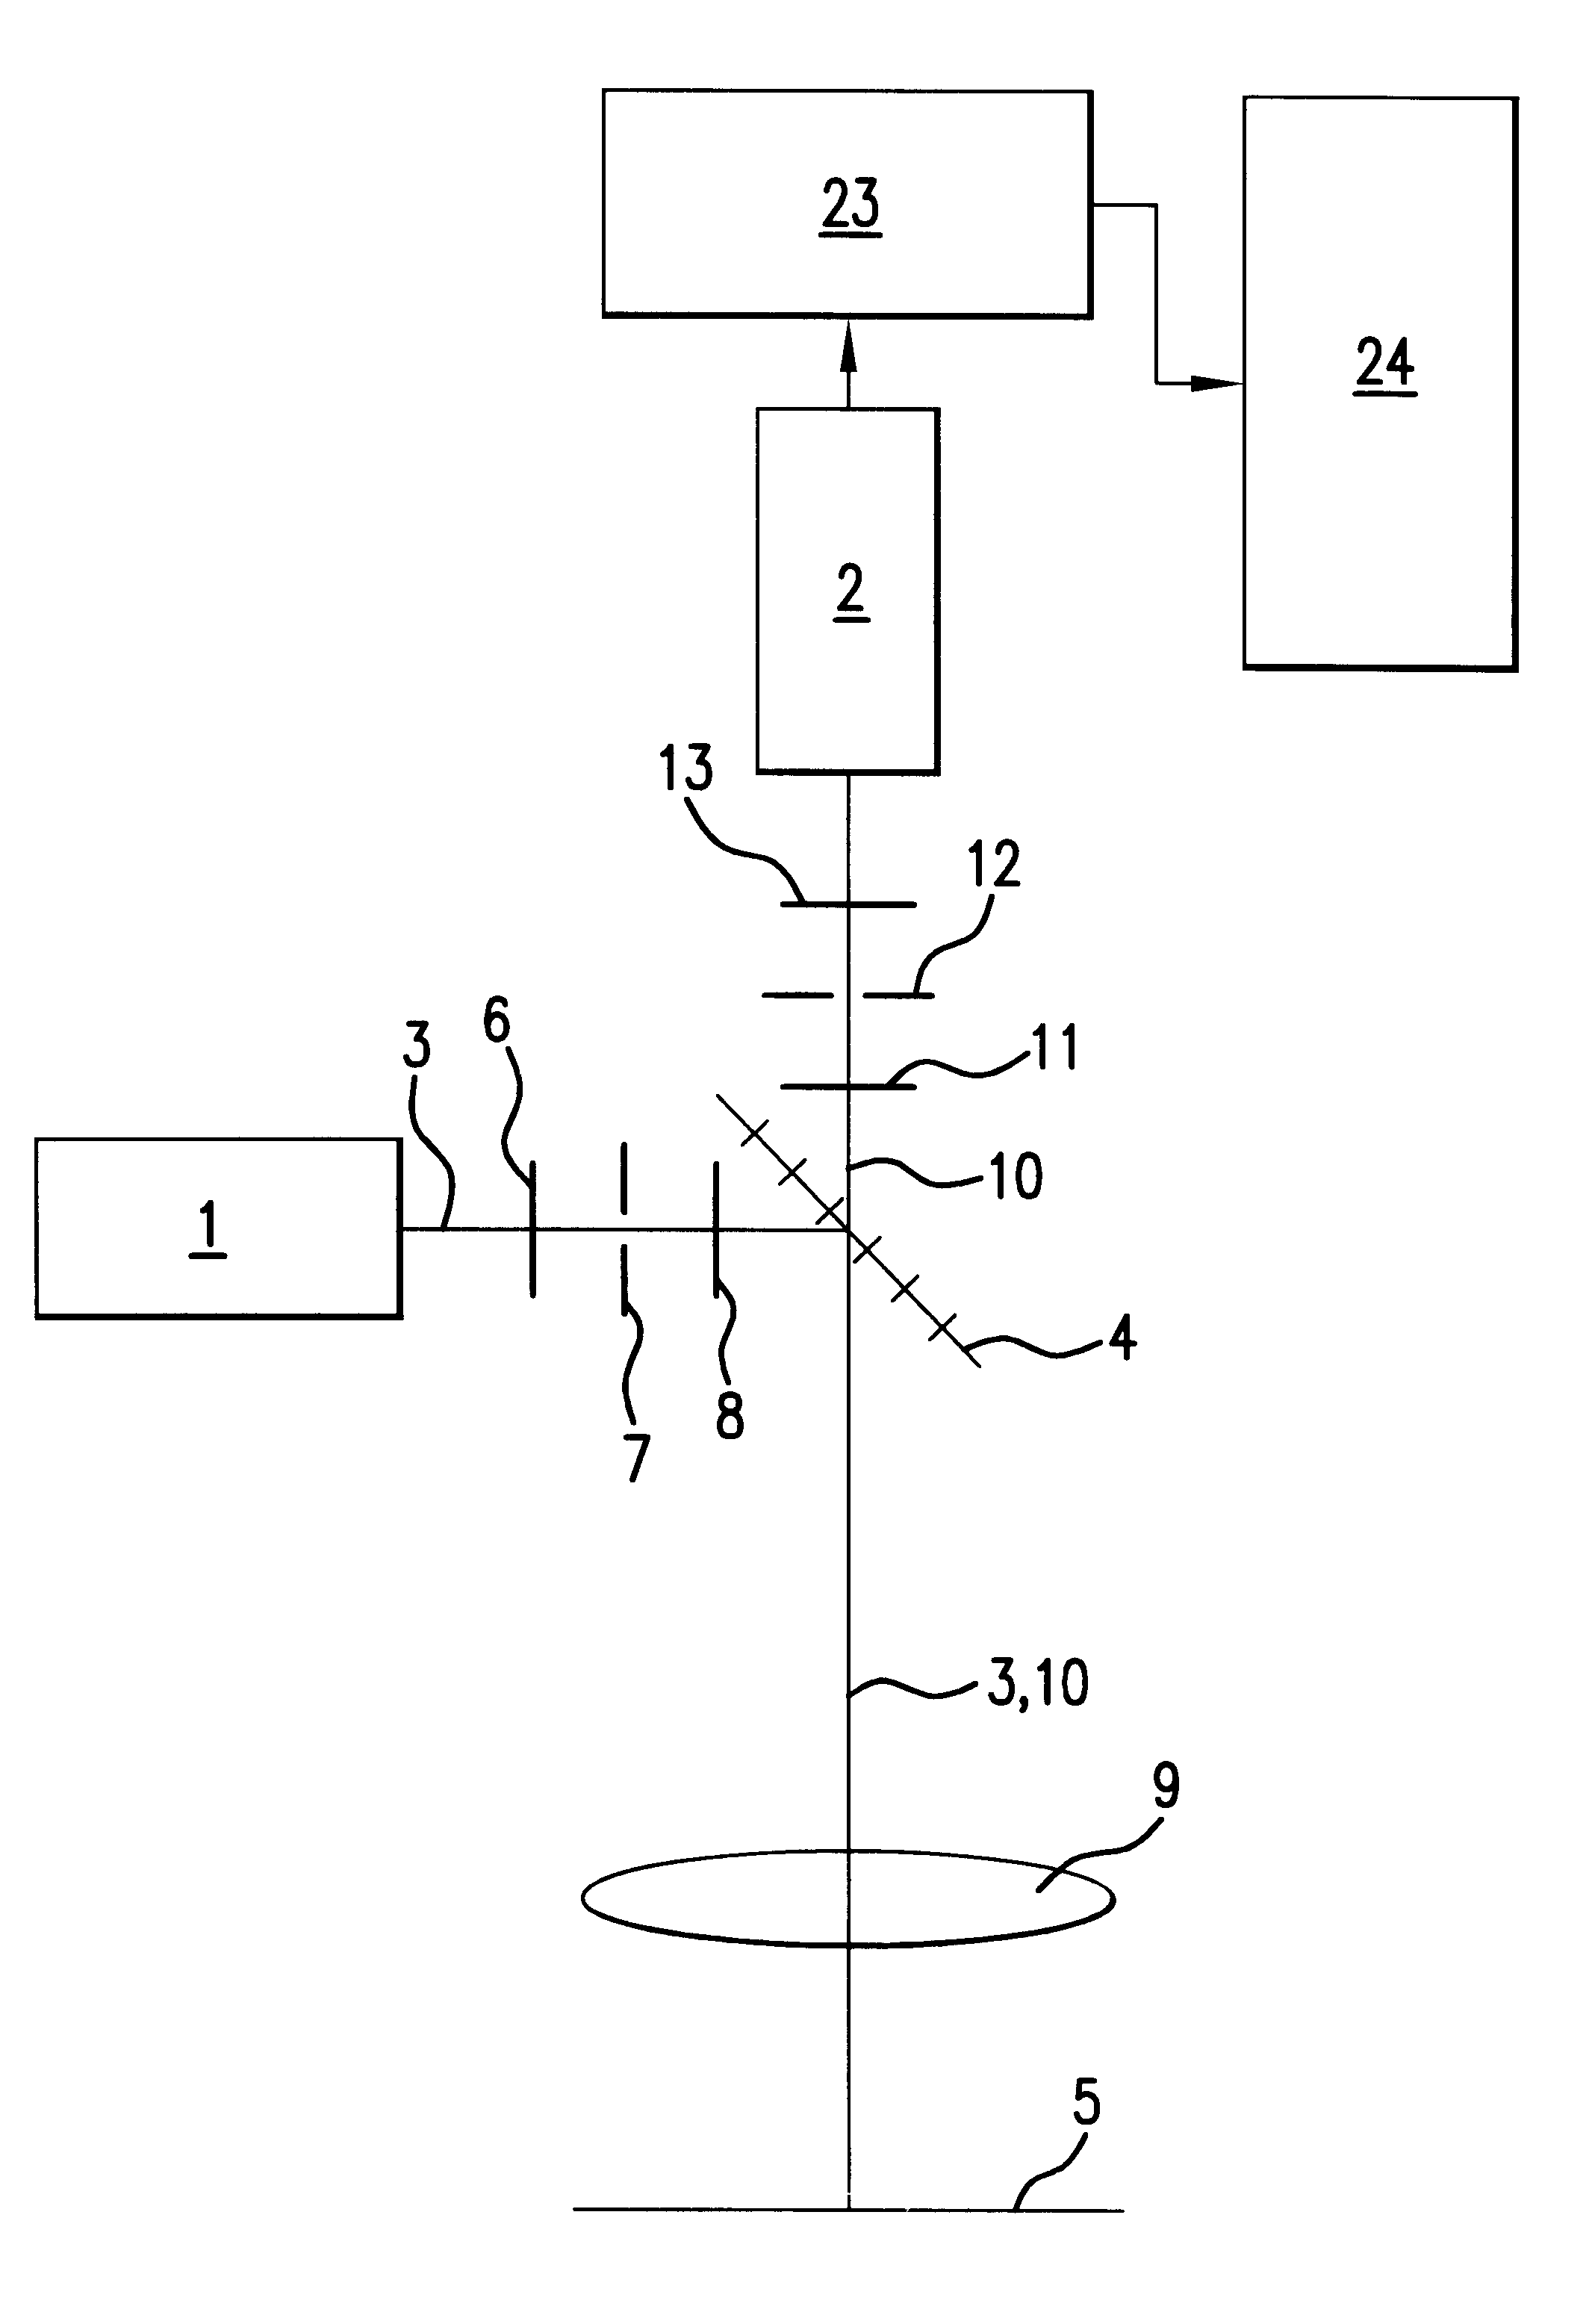 Method of finding, recording and evaluating object structures